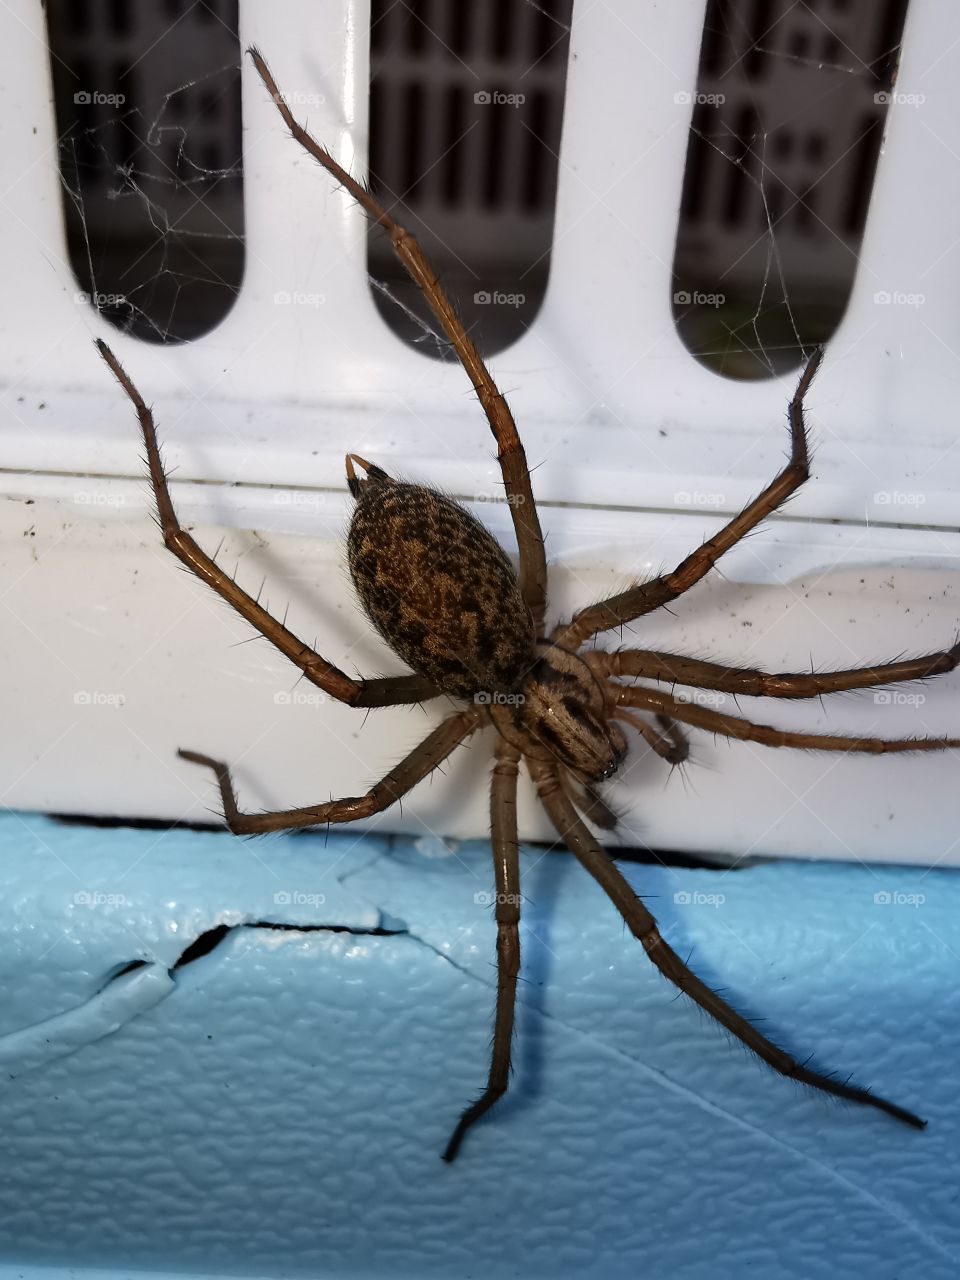 Spider  with a body of about 4 cm